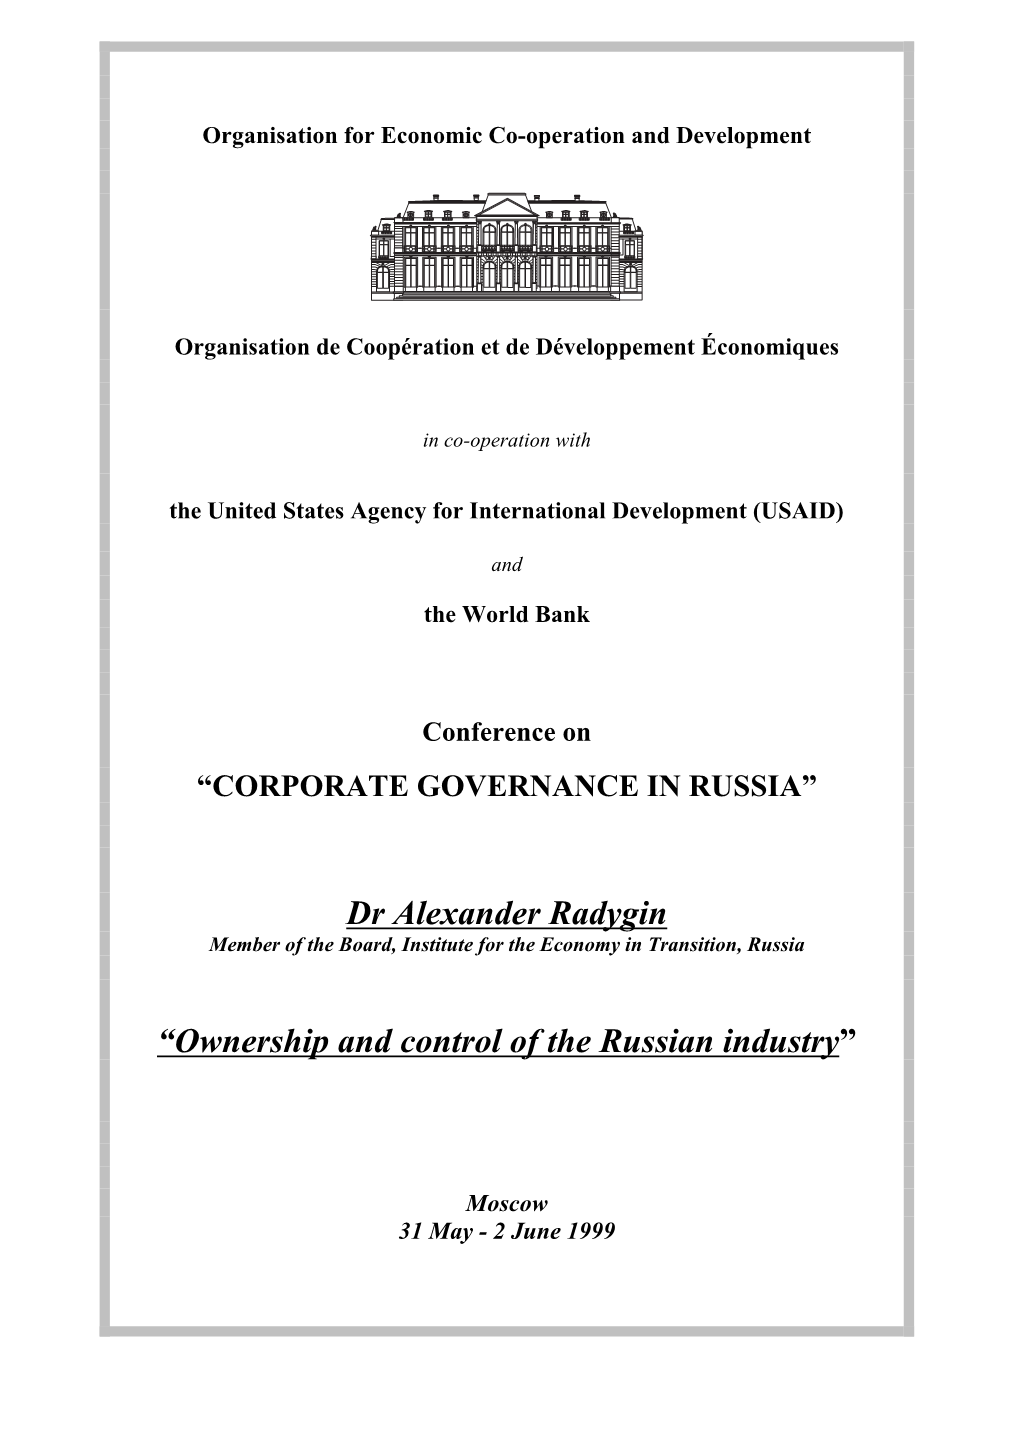 Dr Alexander Radygin “Ownership and Control of the Russian Industry”